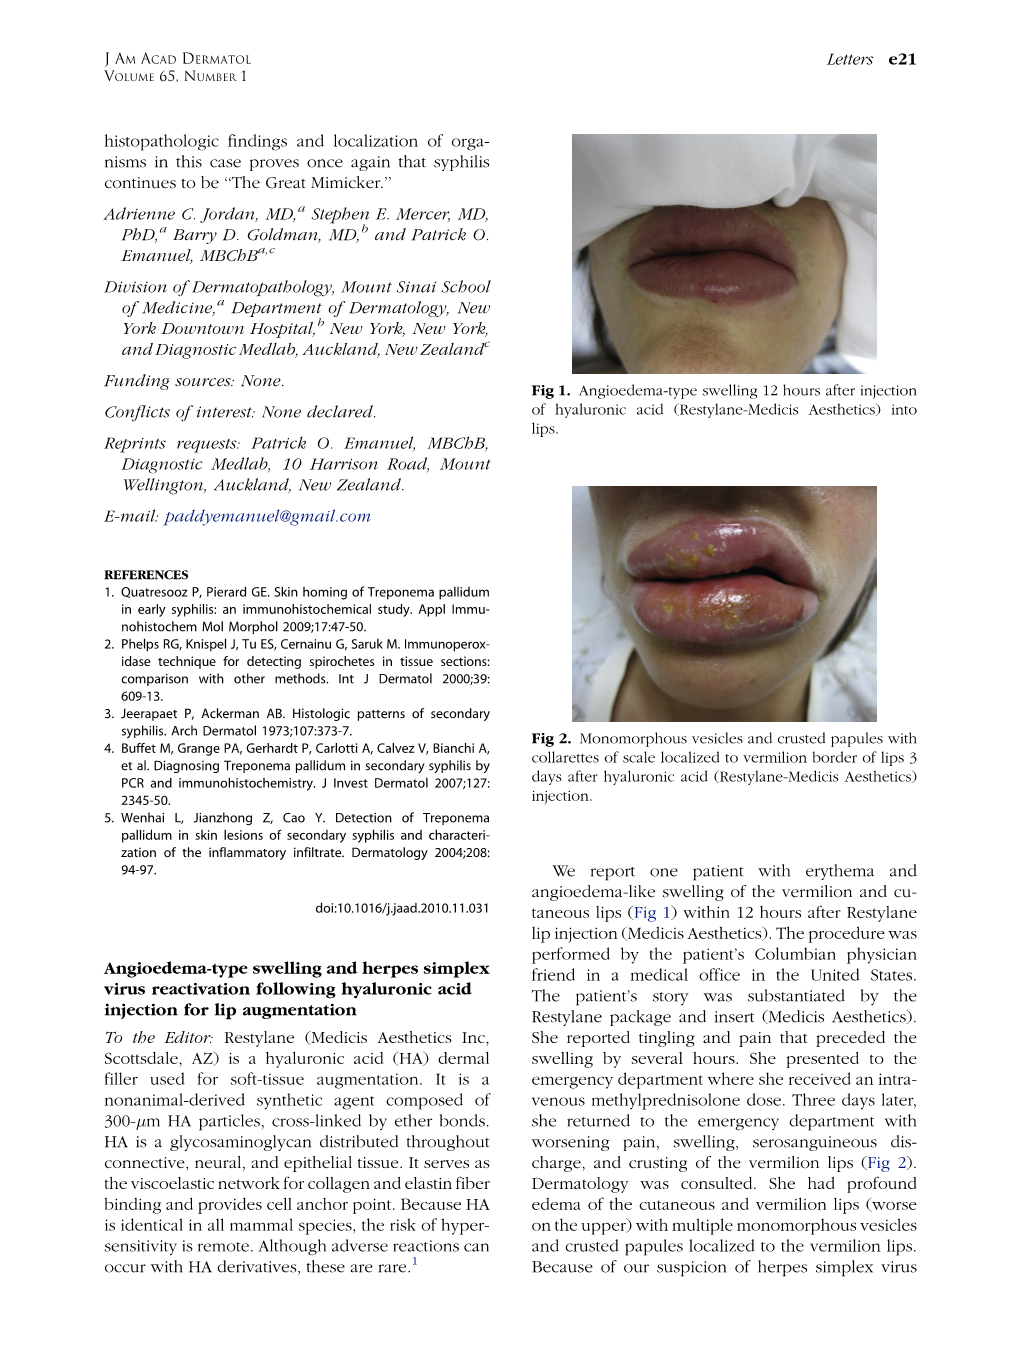 Angioedema-Type Swelling and Herpes Simplex Virus Reactivation Following Hyaluronic Acid Injection for Lip Augmentation